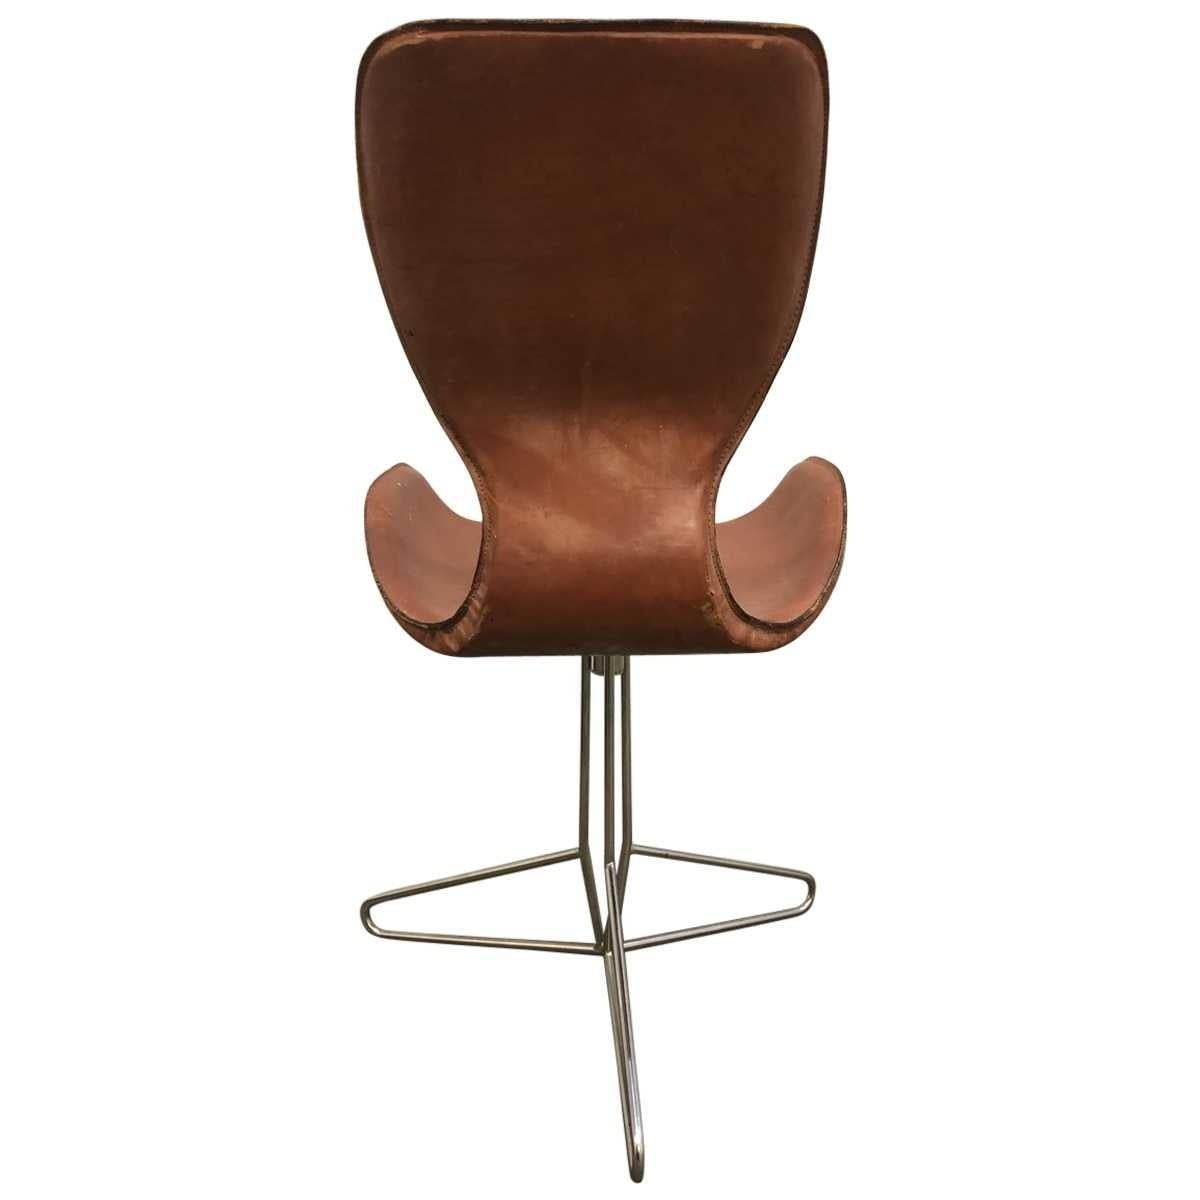 20th Century Pair of Swivel Chairs in the style of Arne Jacobsen